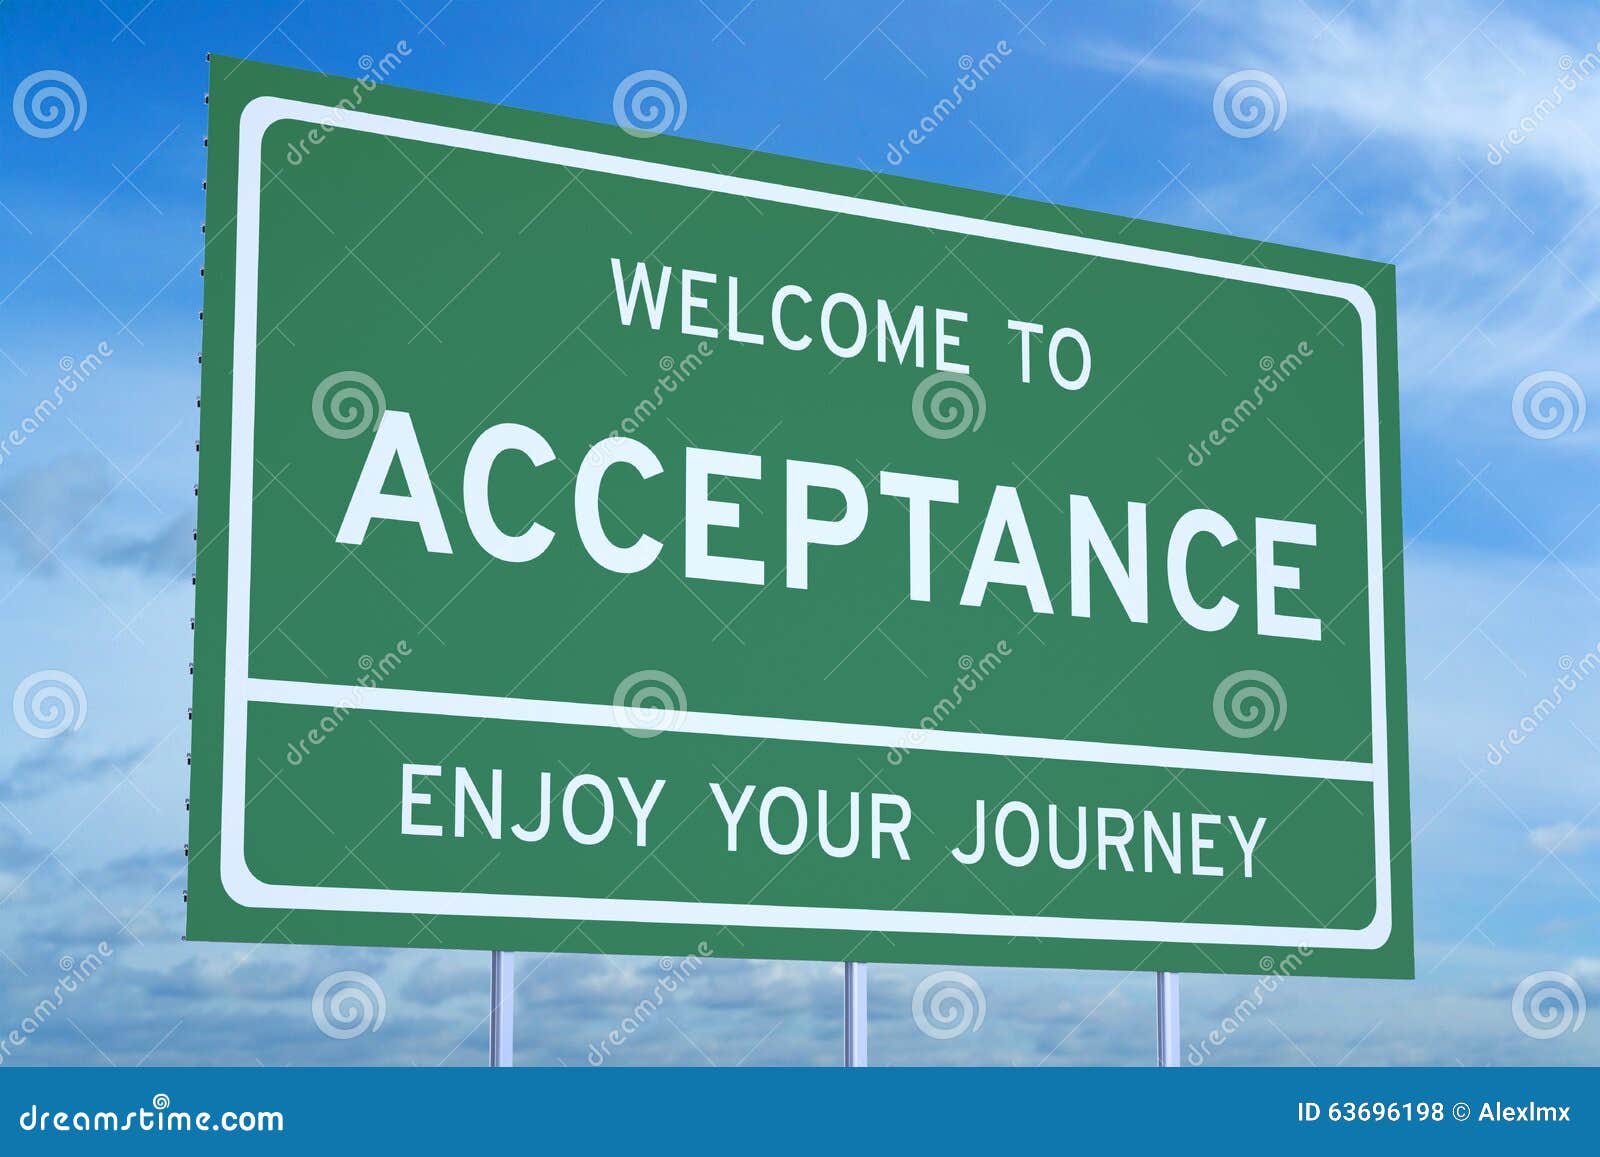 welcome to acceptance concept